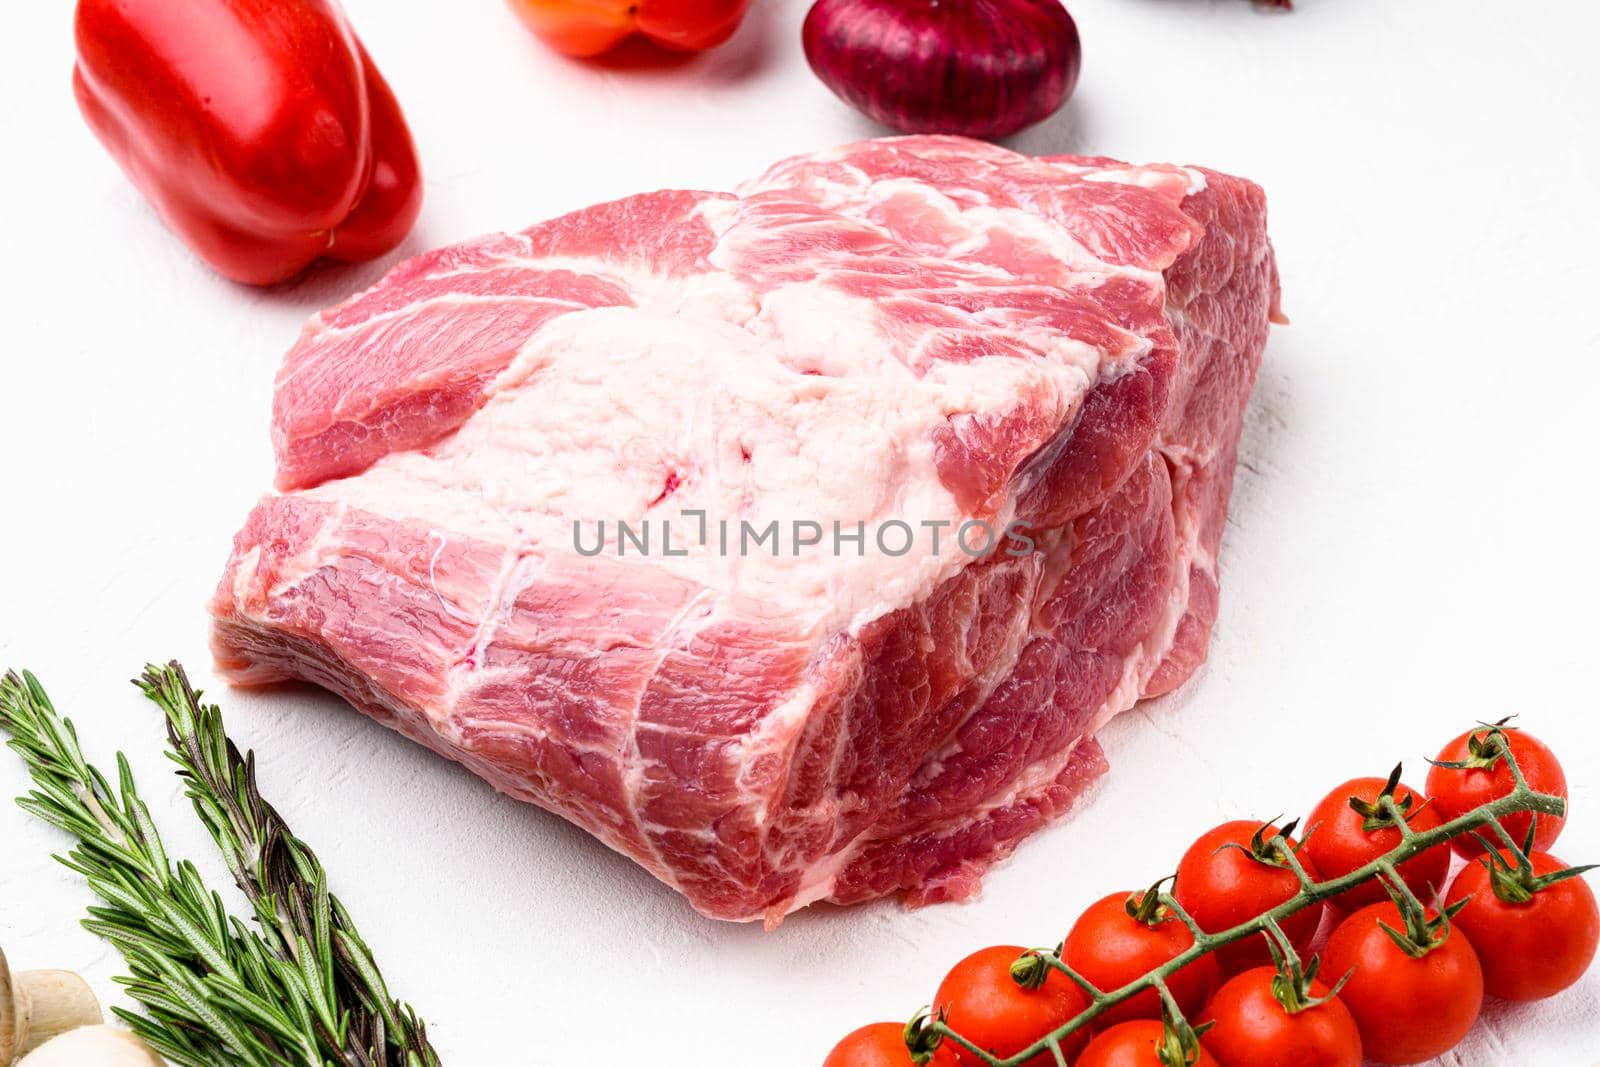 Pork Neck meat steak set, with ingredients and herbs, on white stone table background